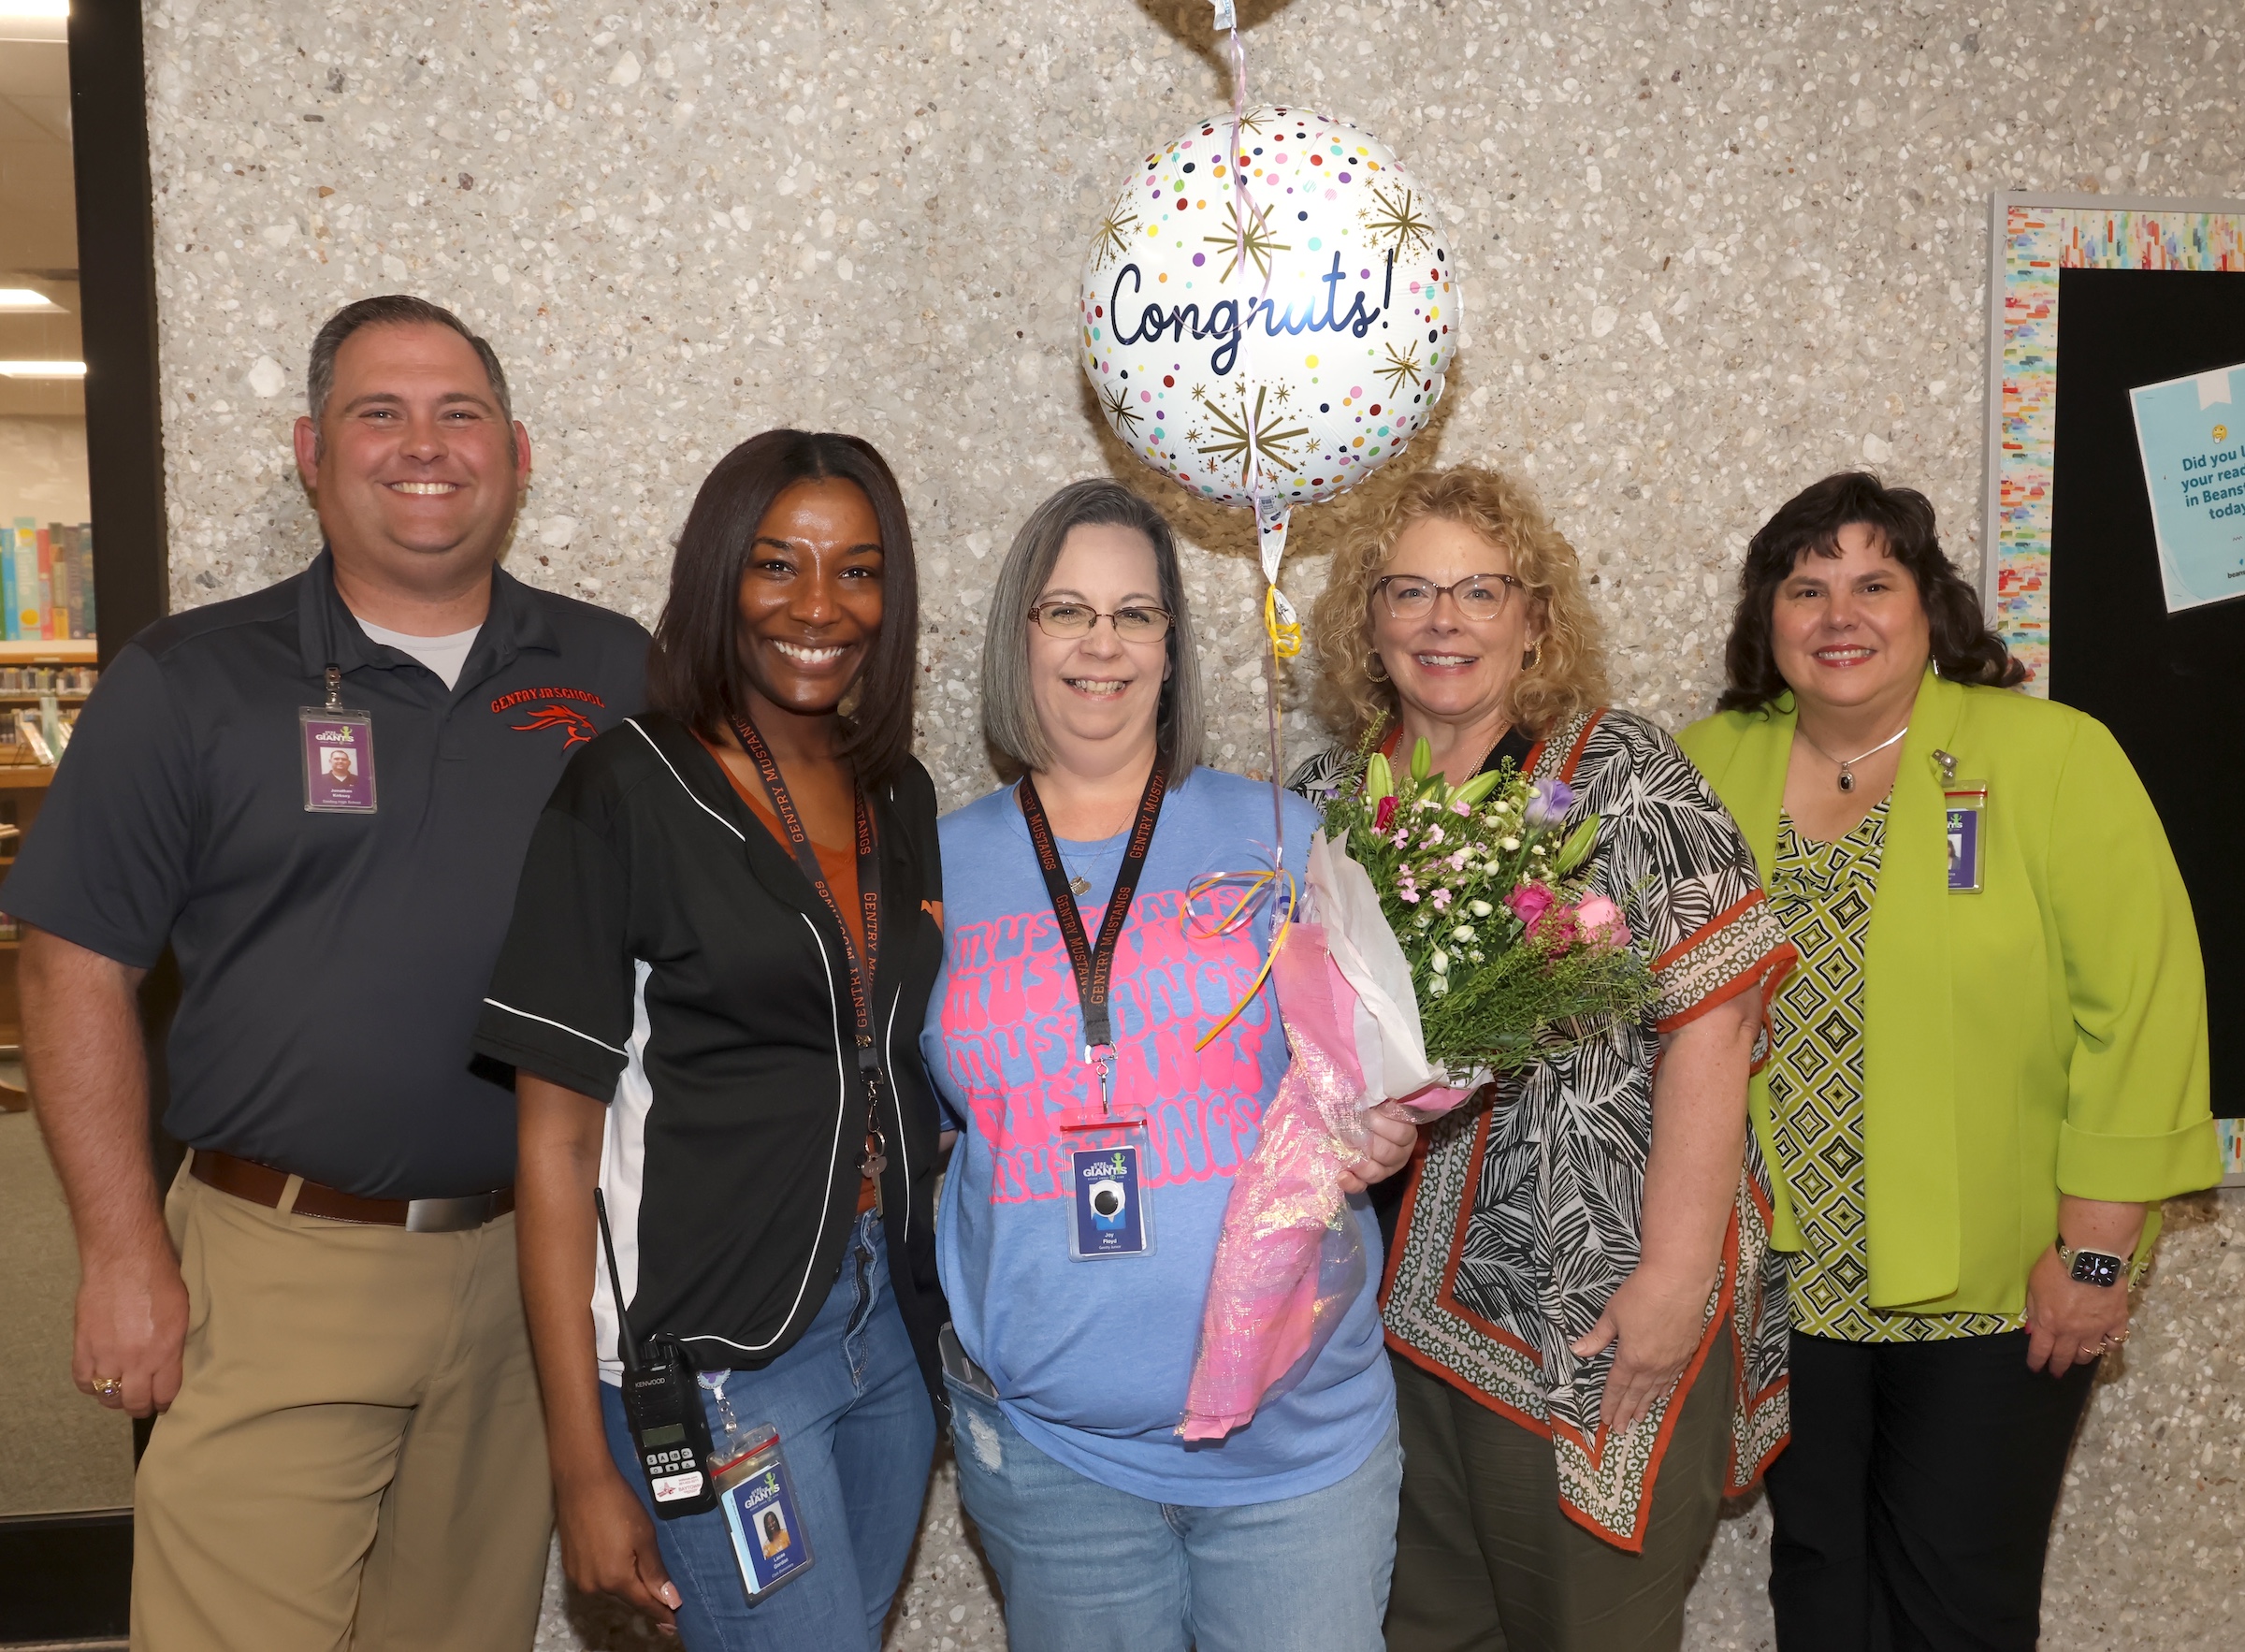 Joy Floyd poses with flowers and administrators